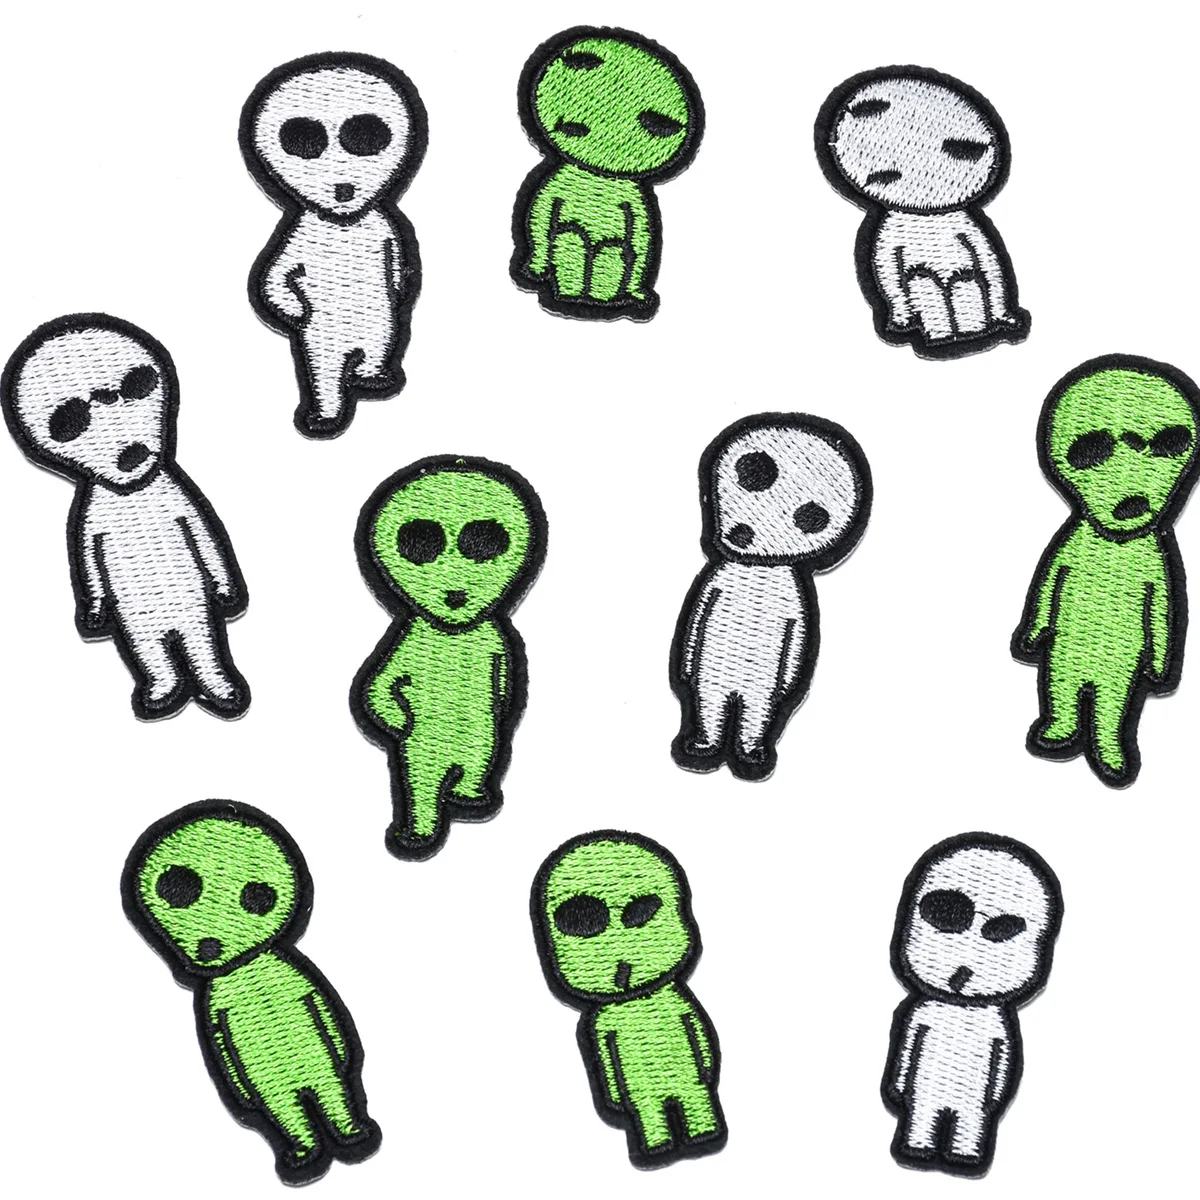 

10Pcs/lot Cartoon Alien Iron on Embroidered Patches For on Clothes Jeans Hat Bag Sticker Sew DIY Patch Applique Badges Decor